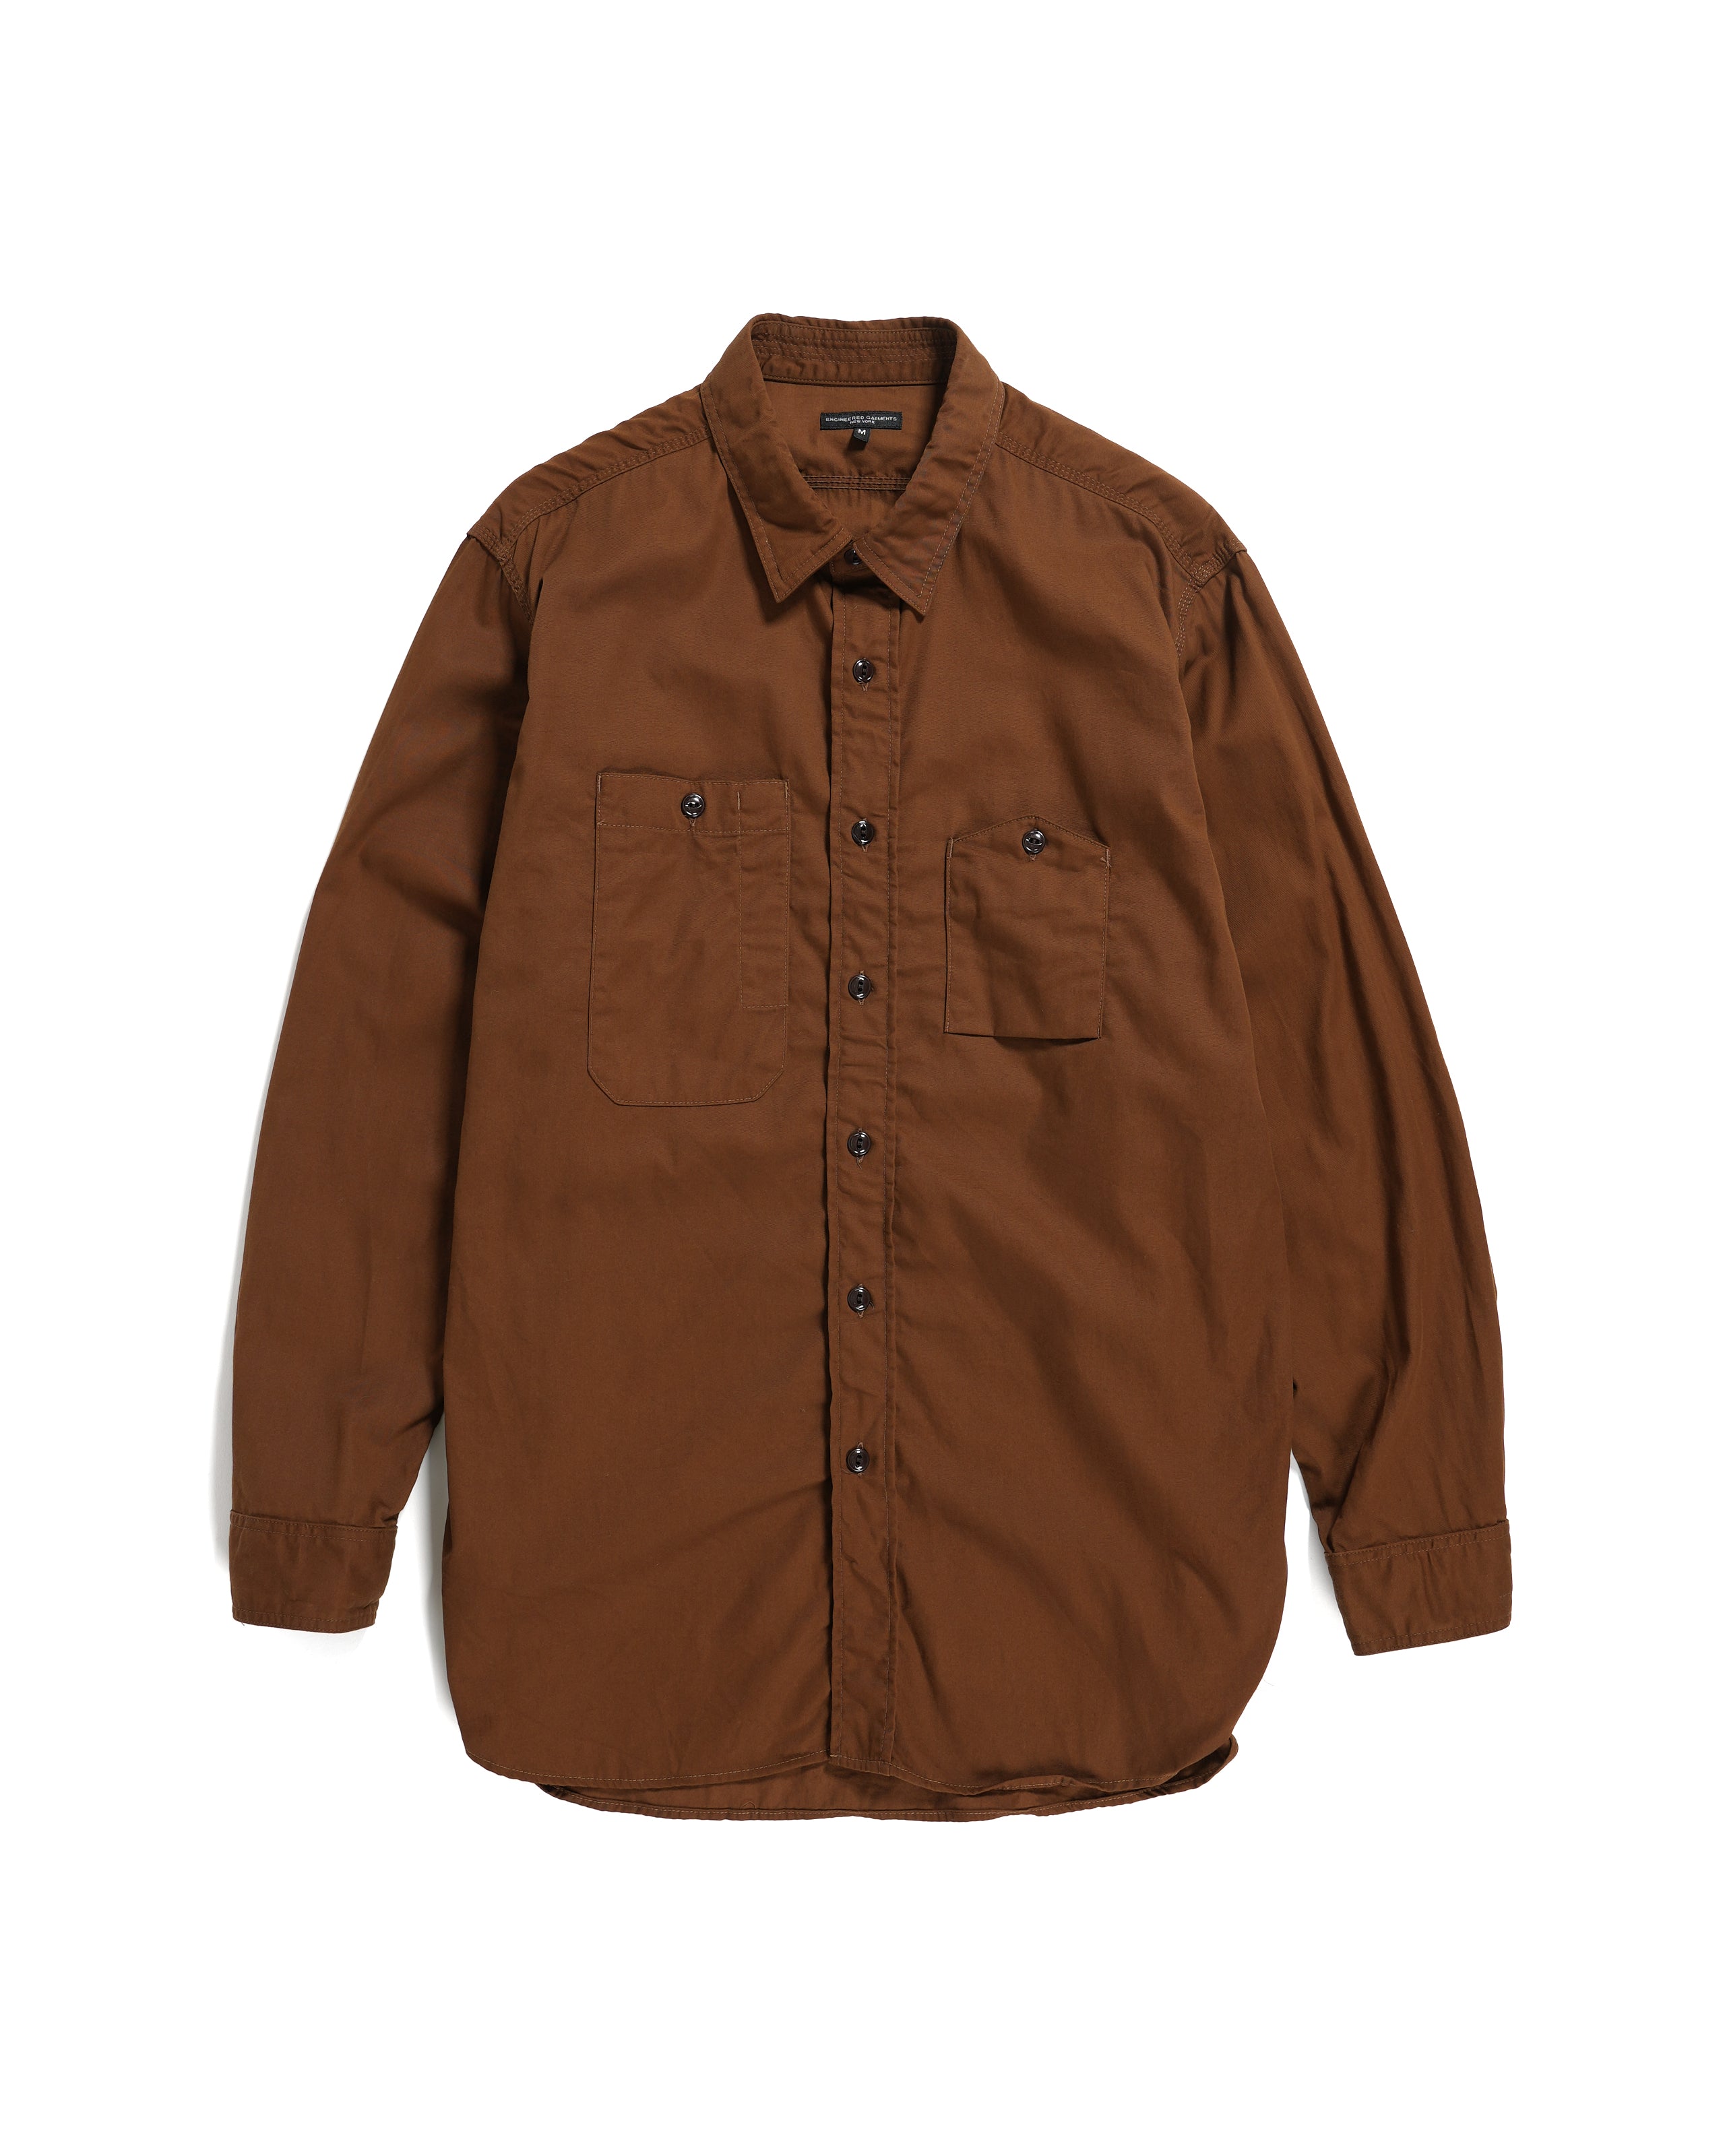 Work Shirt - Brown Cotton Micro Sanded Twill